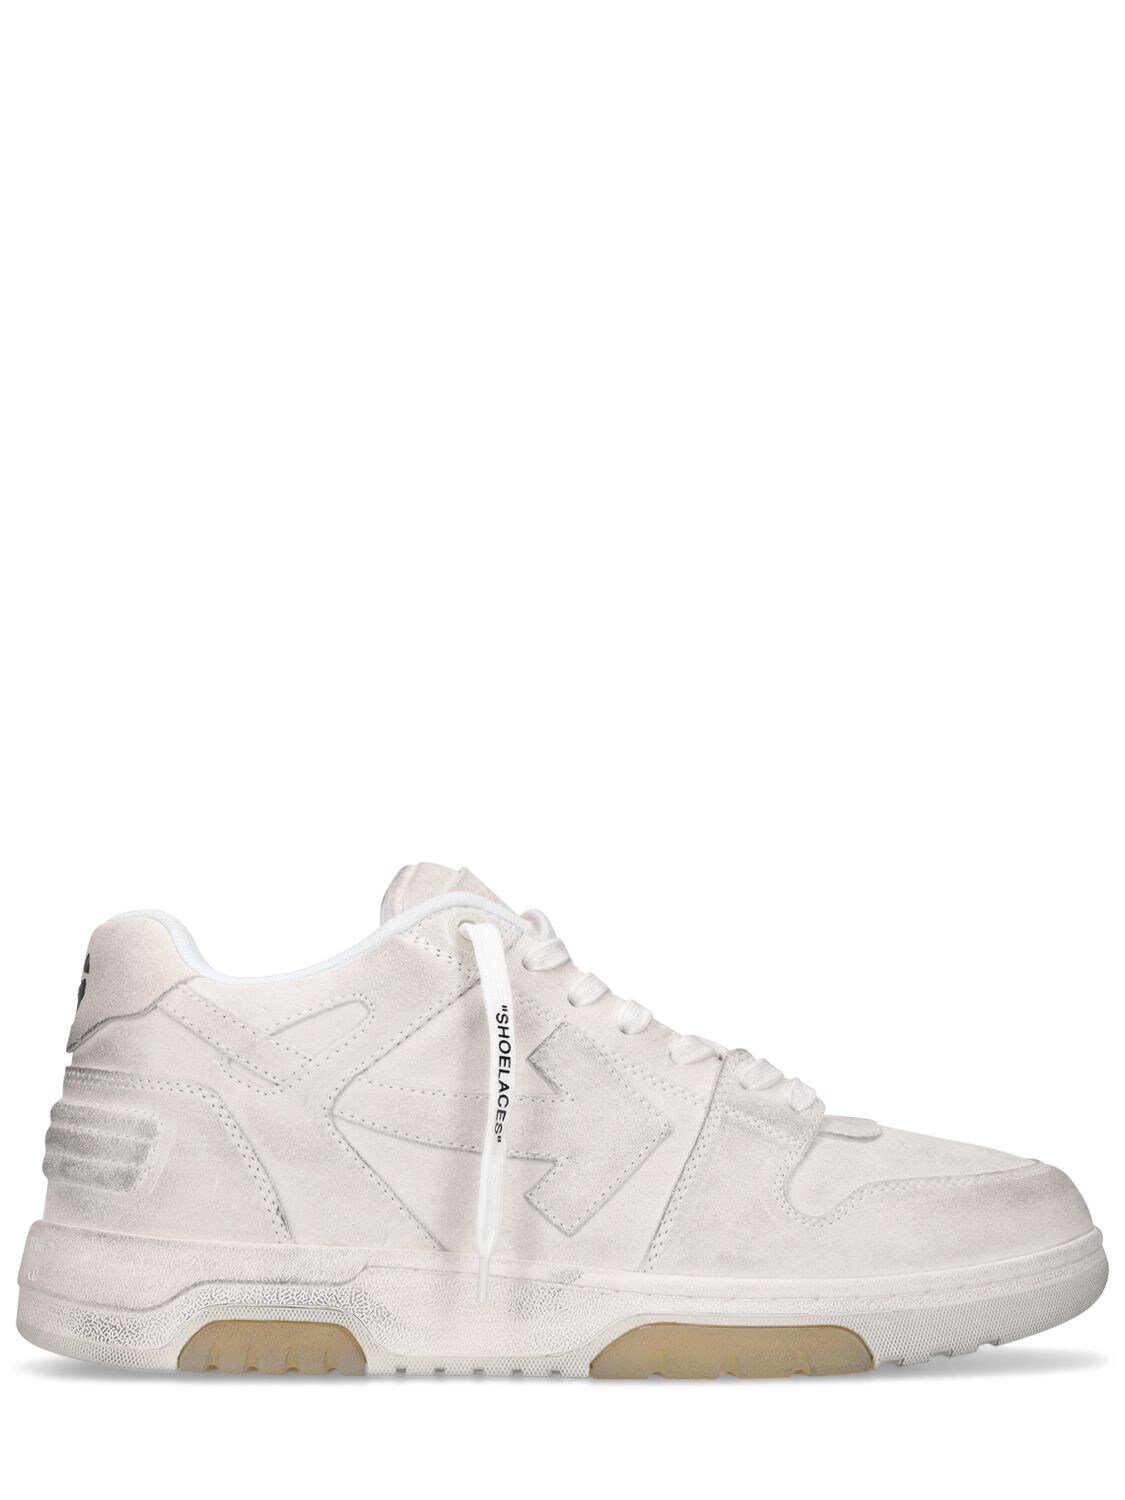 OFF-WHITE OUT OF OFFICE VINTAGE SUEDE SNEAKERS